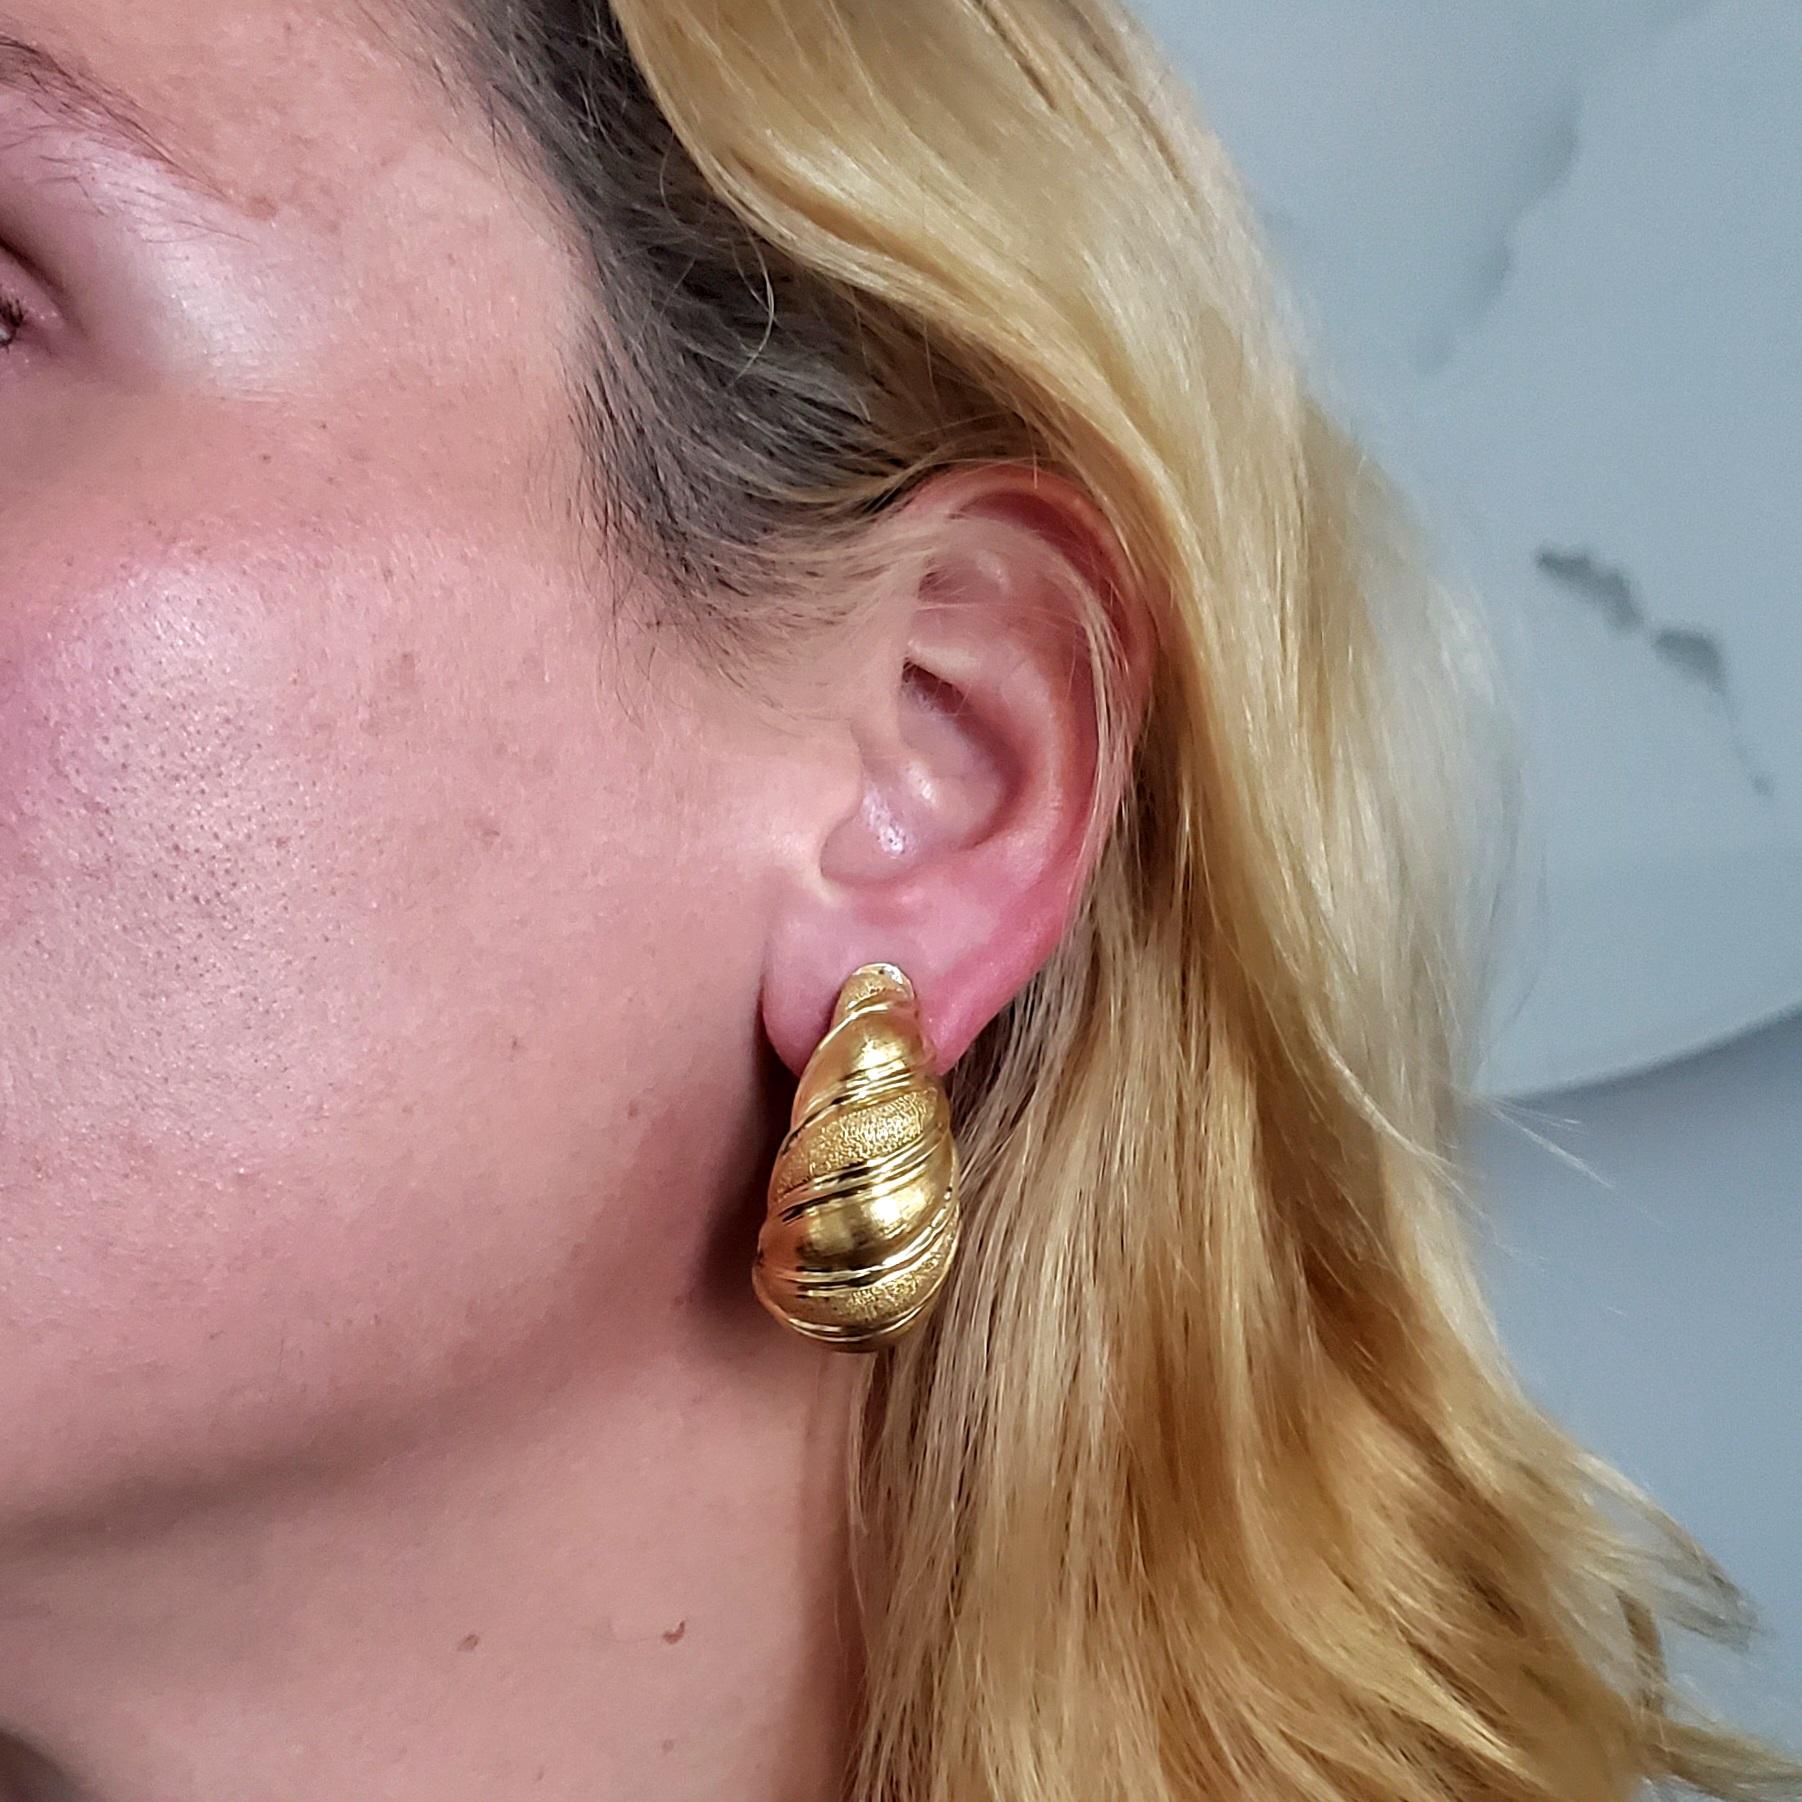 Pair of hoops earrings designed by Gübelin.

Great pair of hoops earrings, created in Switzerland by the jewelry house of Gubelin, back in the 1960's. These highly textured hoops has been crafted in solid yellow gold of 18 karats with high polished